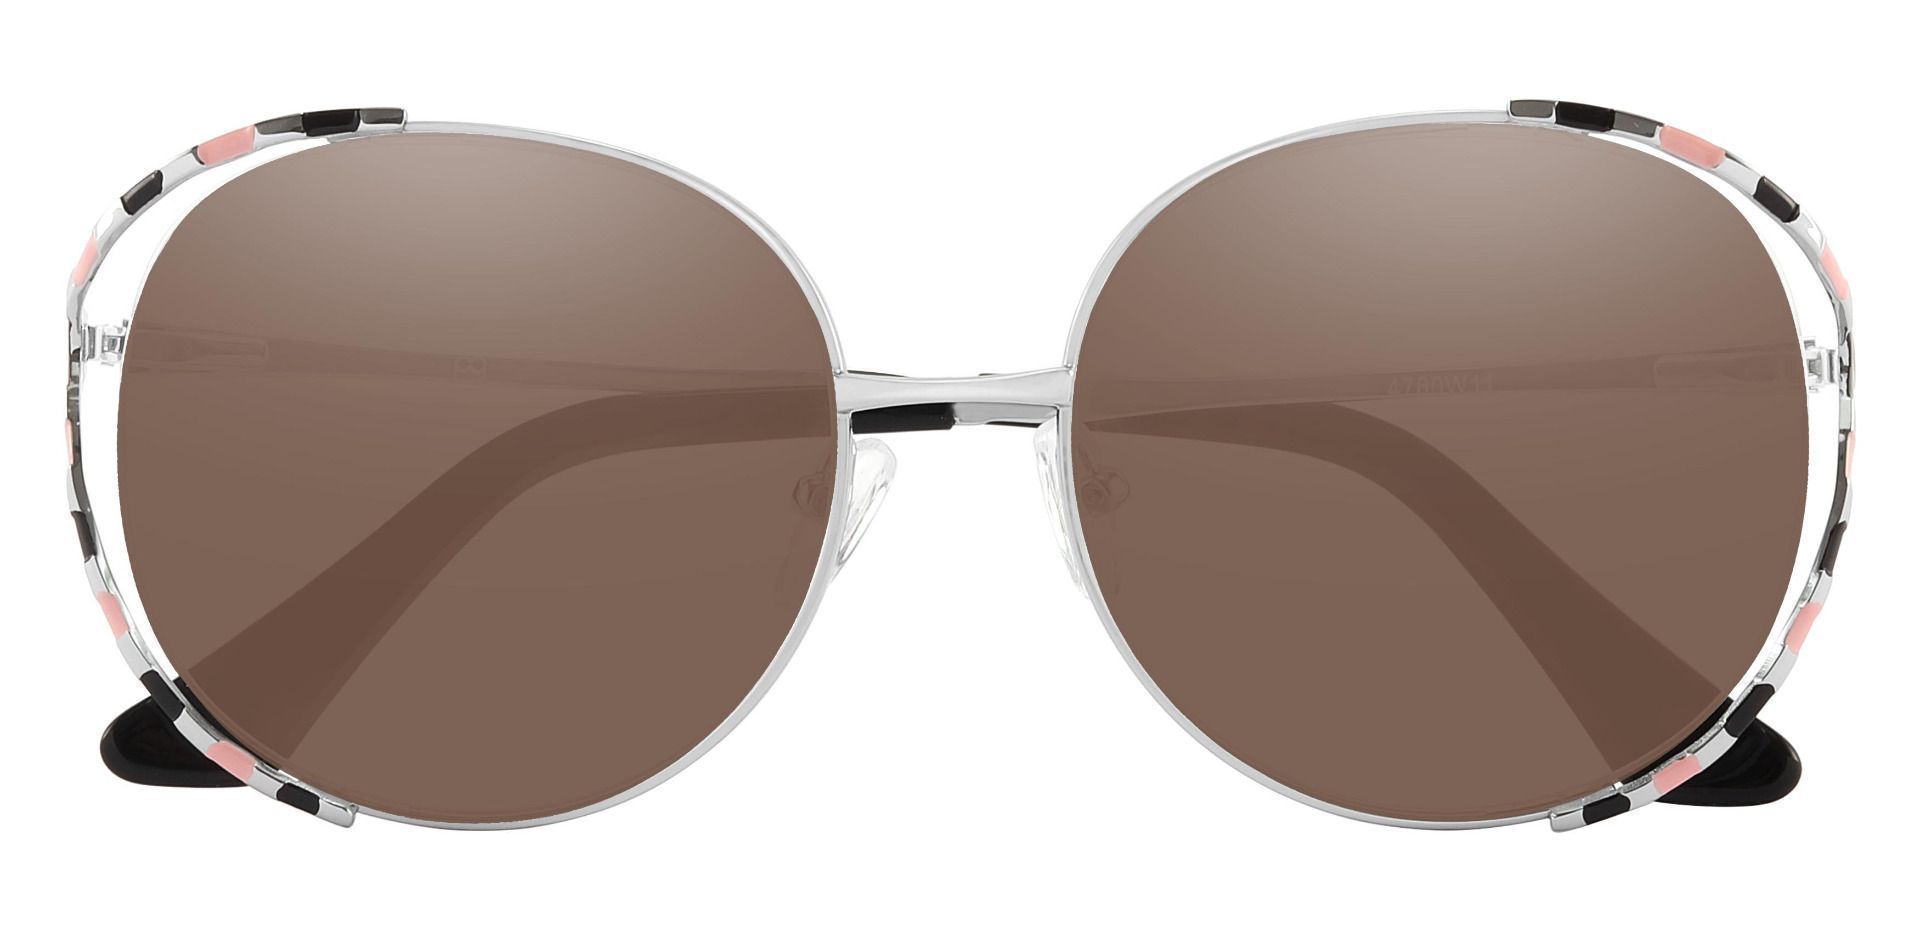 Dorothy Oval Non-Rx Sunglasses - Black Frame With Brown Lenses